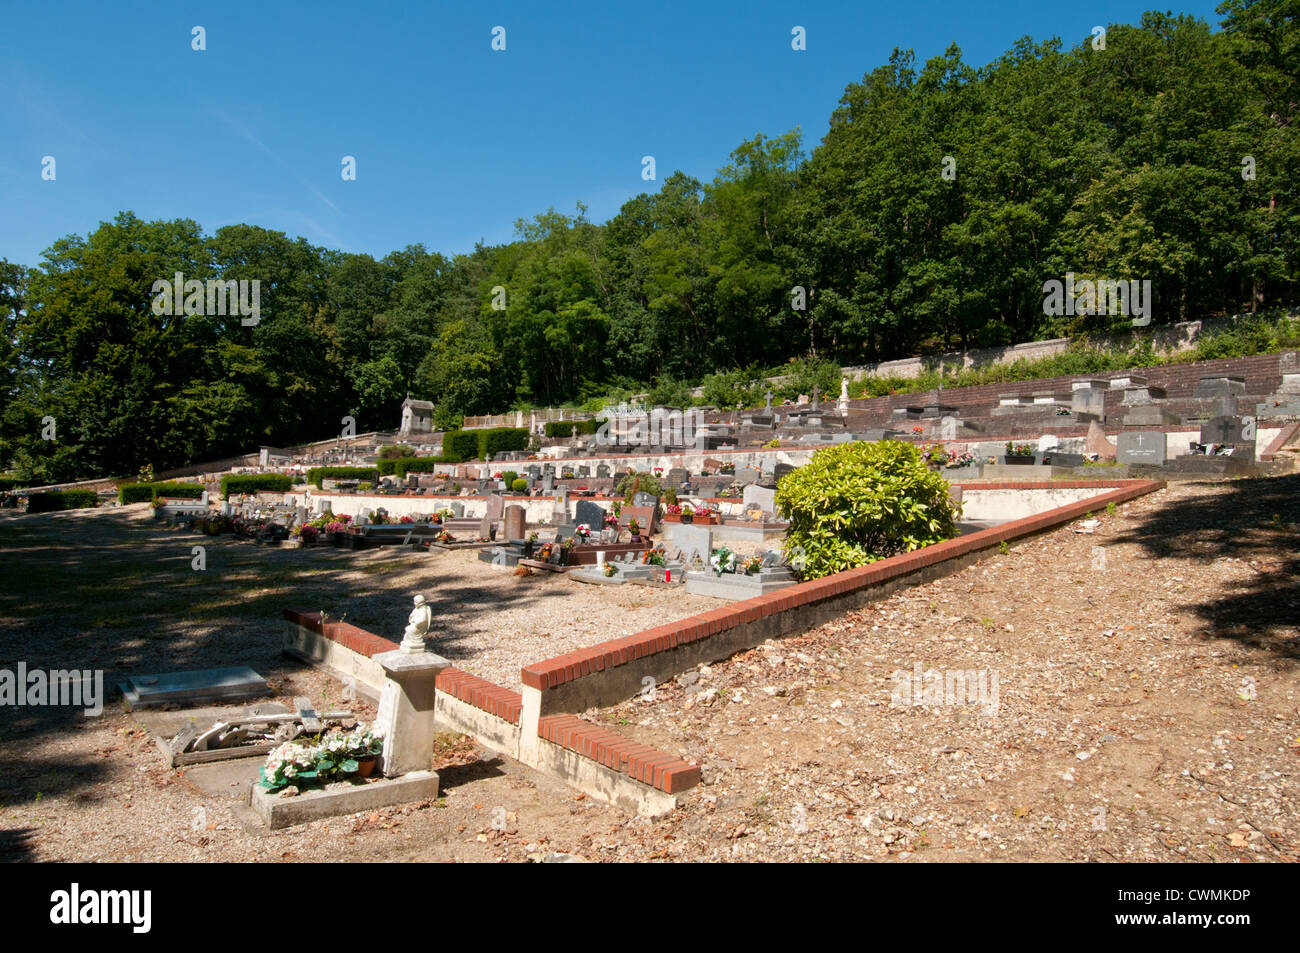 French cemetery, Normandy, France. Stock Photo